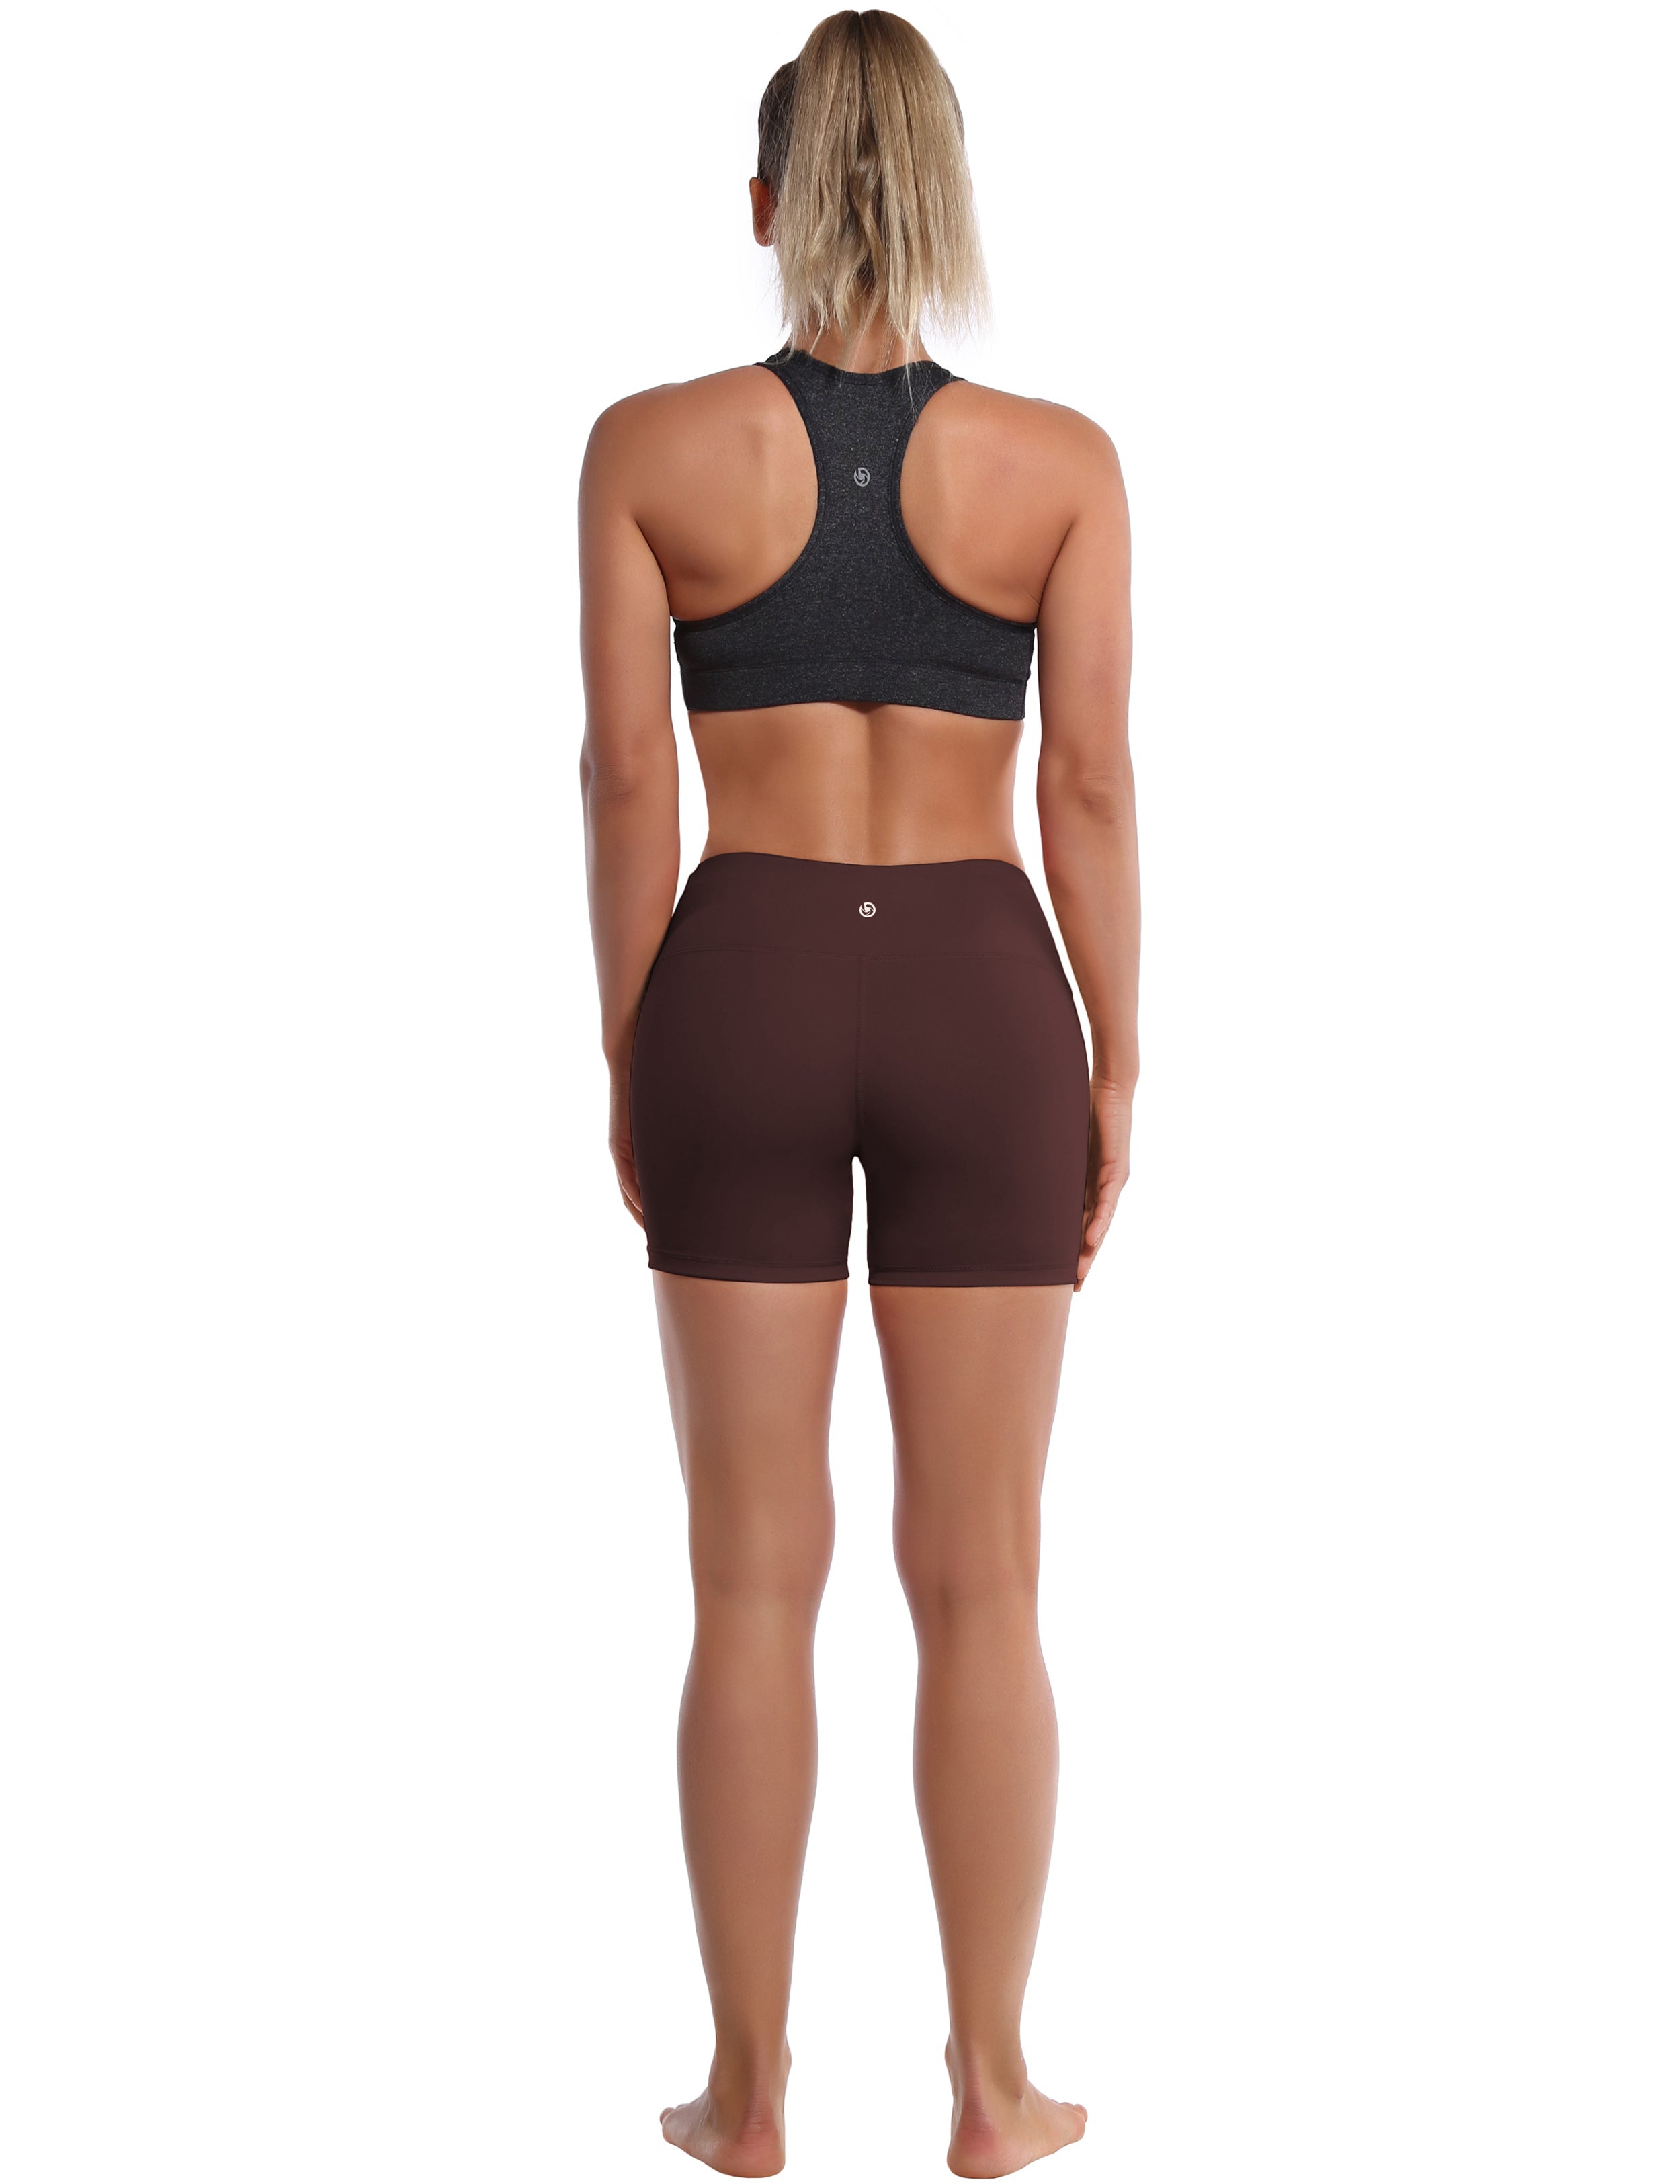 4" Golf Shorts mahoganymaroon Sleek, soft, smooth and totally comfortable: our newest style is here. Softest-ever fabric High elasticity High density 4-way stretch Fabric doesn't attract lint easily No see-through Moisture-wicking Machine wash 75% Nylon, 25% Spandex